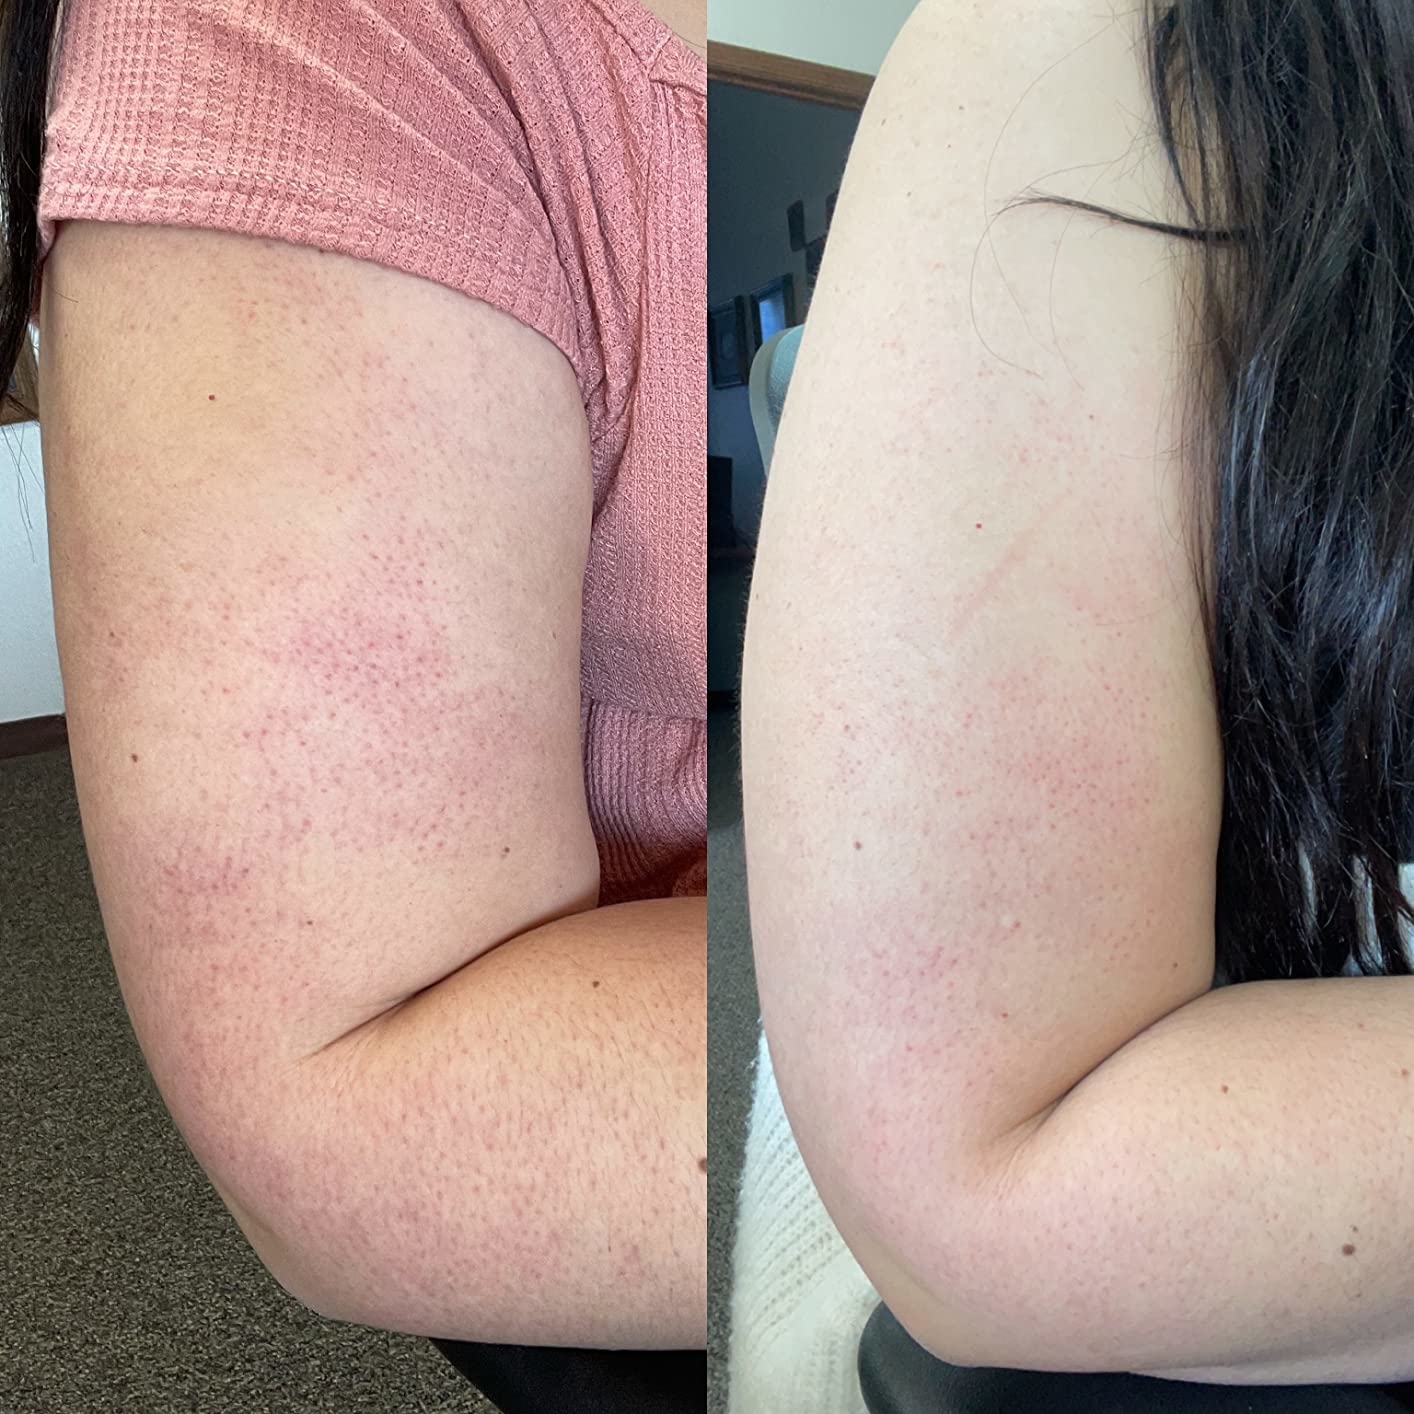 Reviewer showing their arm before and after using the exfoliator